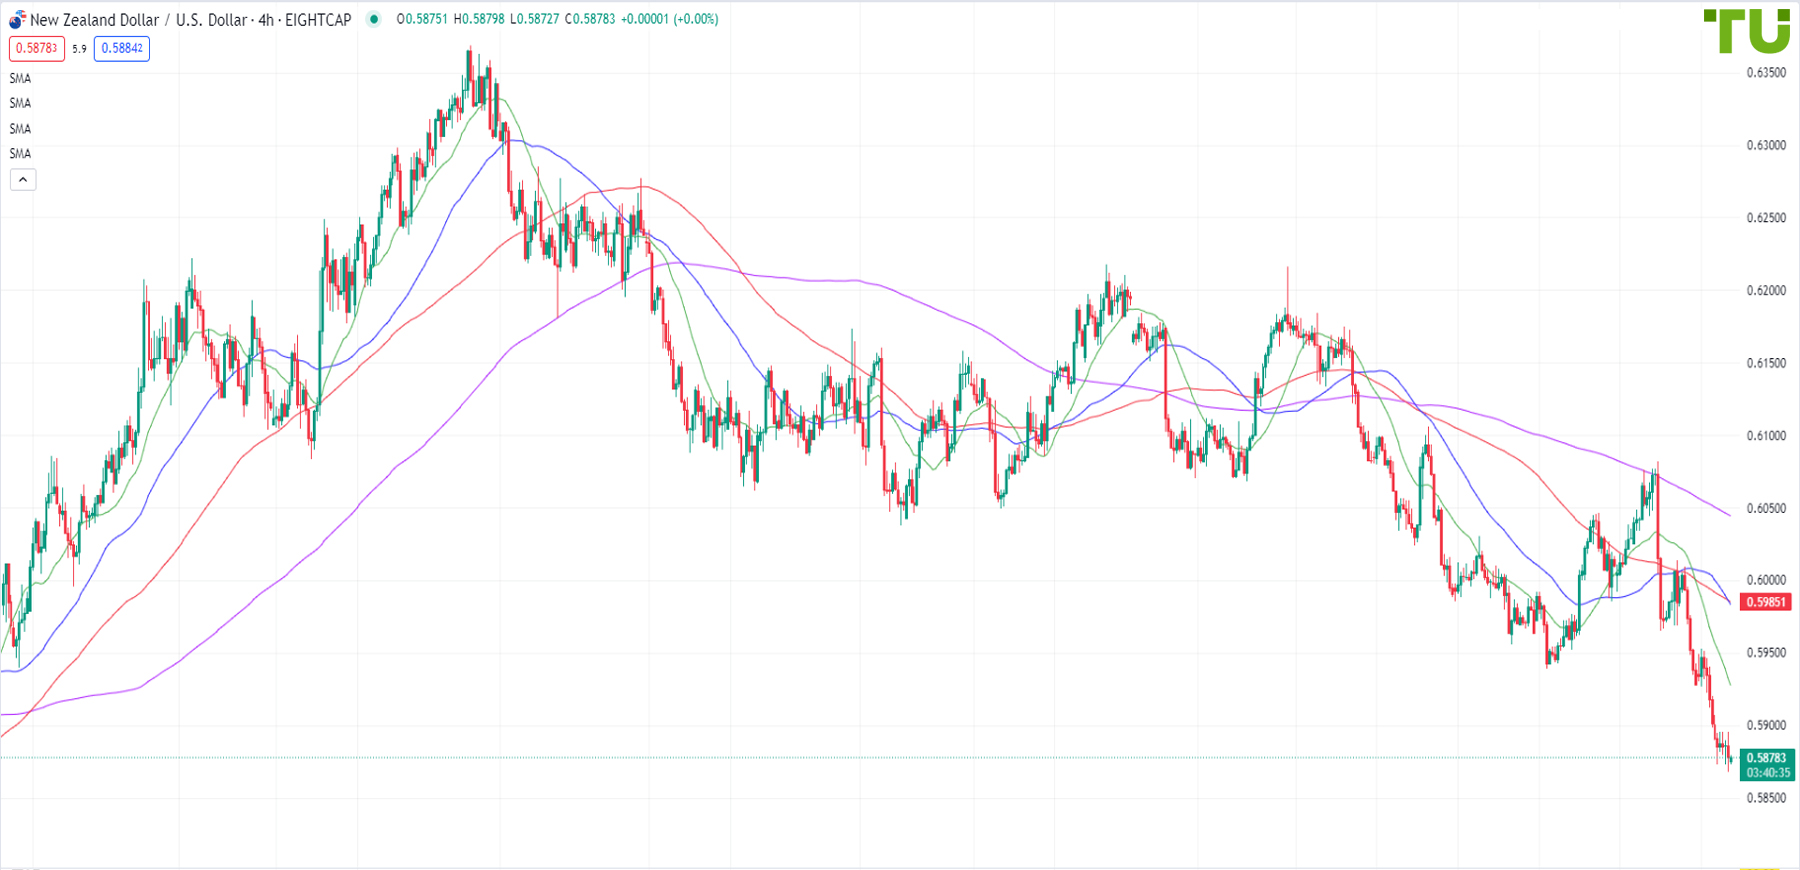 New Zealand dollar/US Dollar testing the support level at 0.5875 